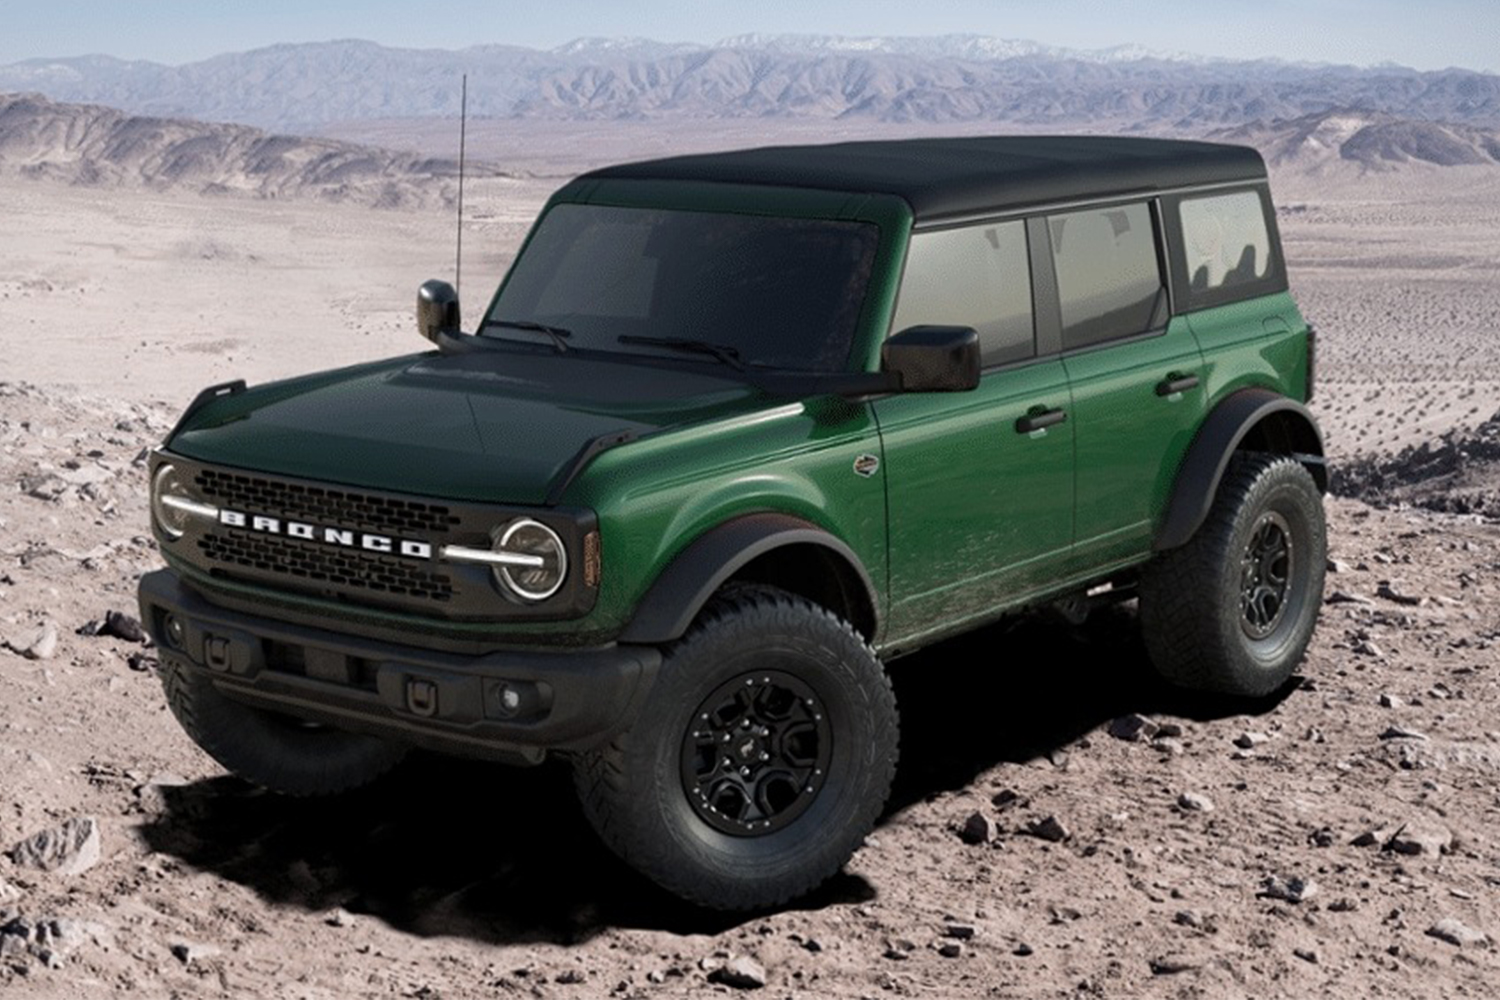 The Ford Bronco Wildtrak in green. We tested and reviewed the off-road SUV.